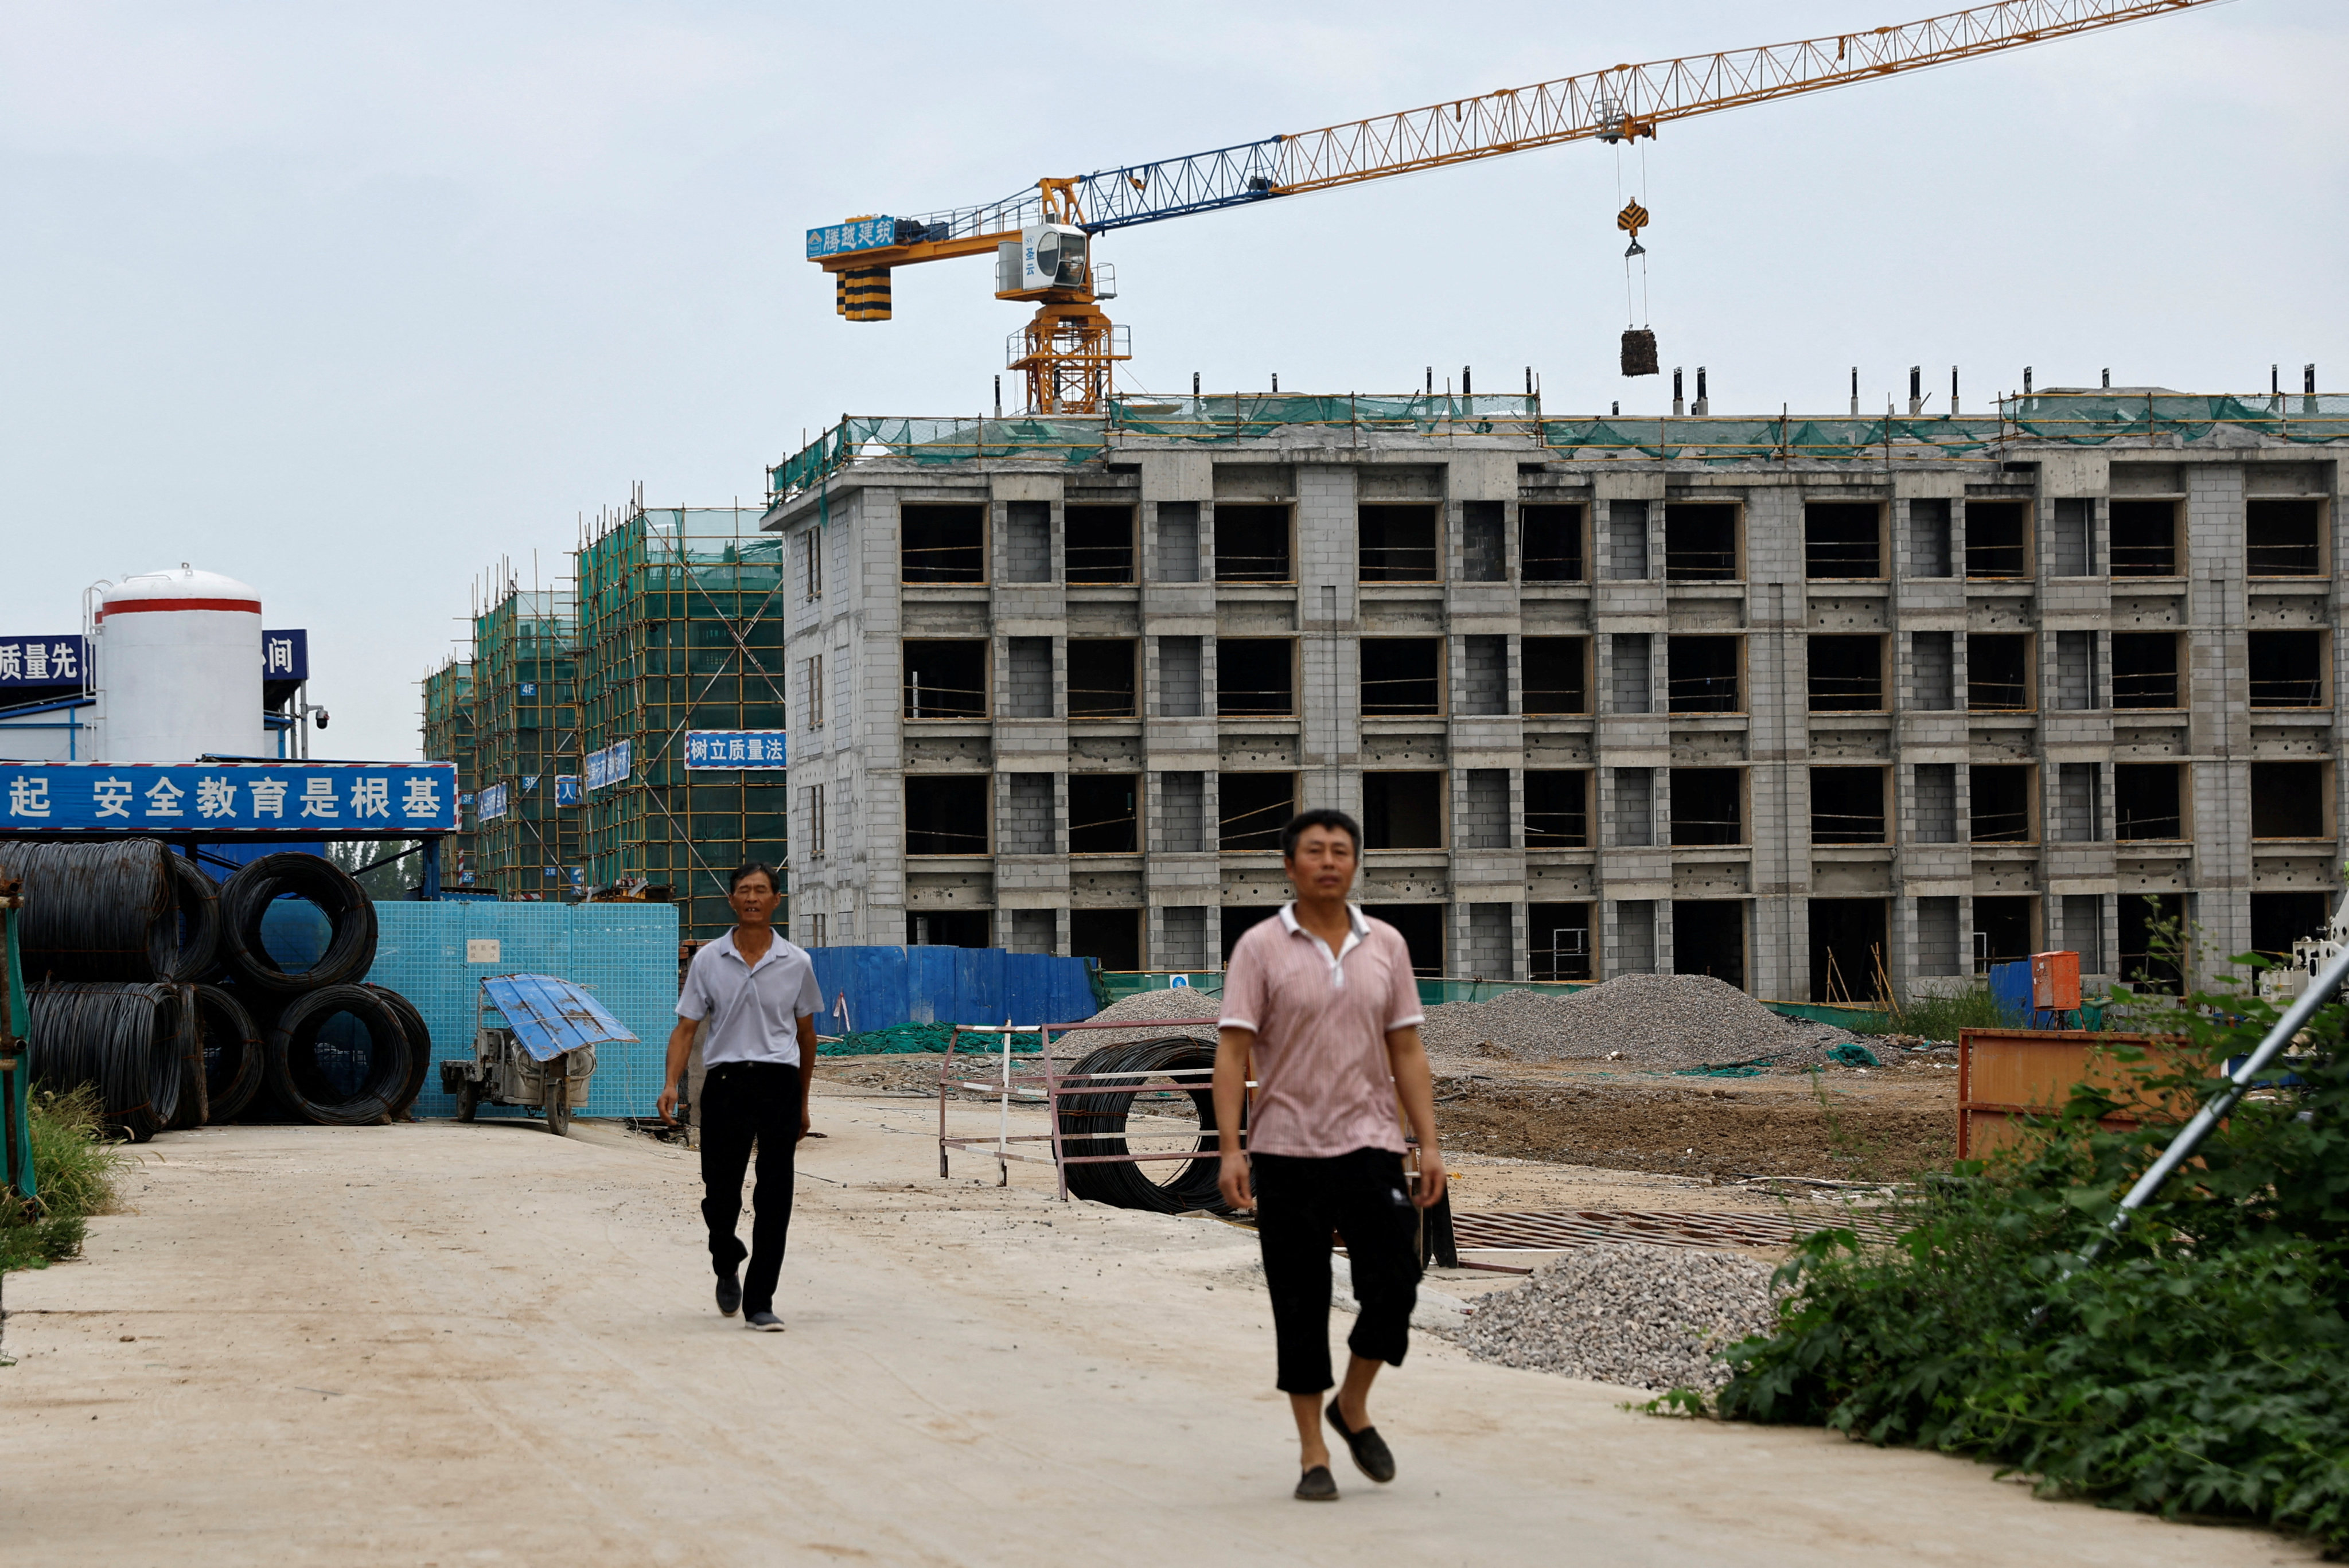 Workers leave a construction site for residential buildings by Chinese developer Country Garden in Tianjin on August 18. The struggles of the property sector have weighed on the country’s economy, but China’s unique blend of openness and state control makes it unlikely to have a “Lehman moment” that rocks global markets. Photo: Reuters